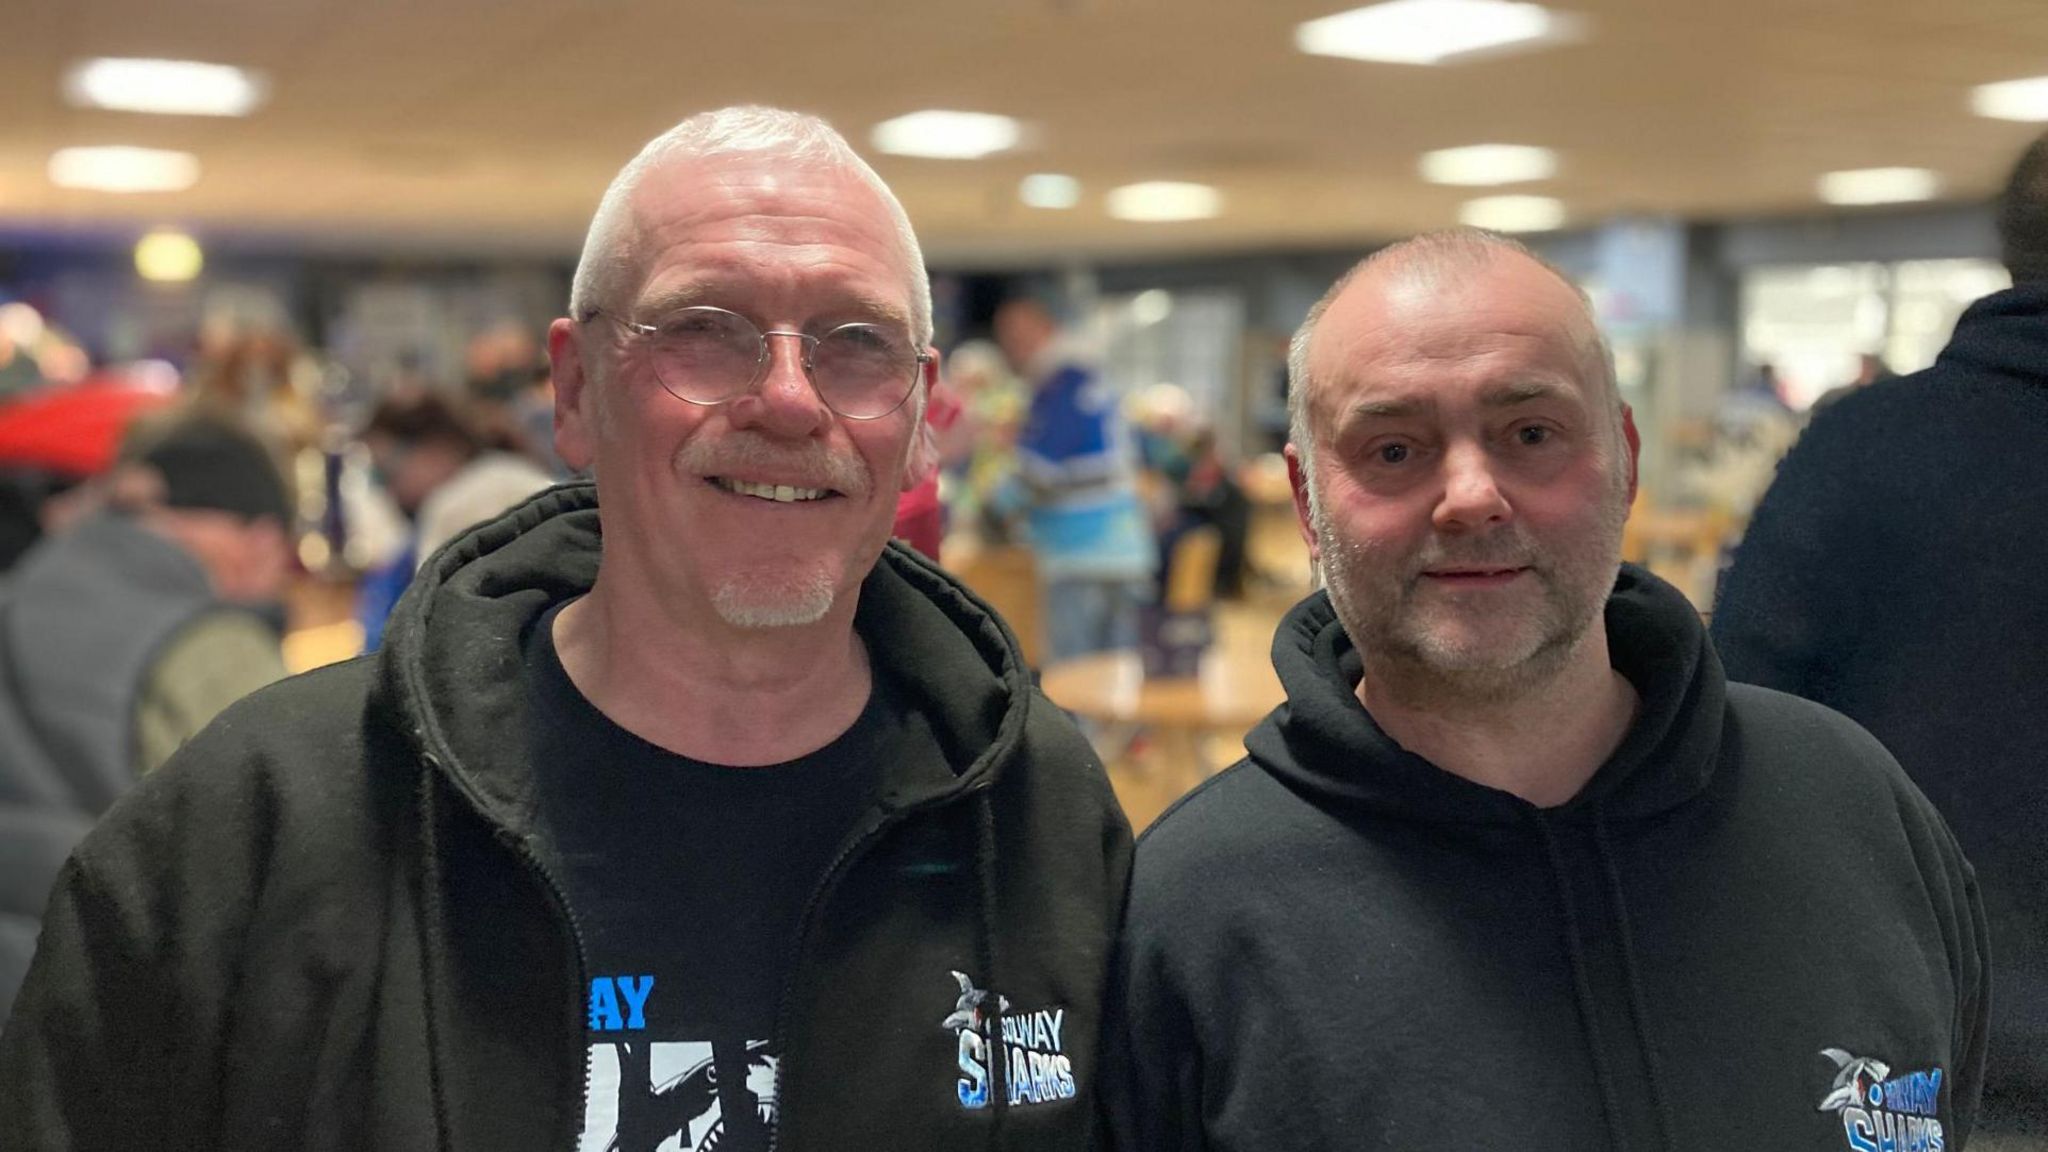 Dave Cochrane and Richard Irving at the Solway Sharks